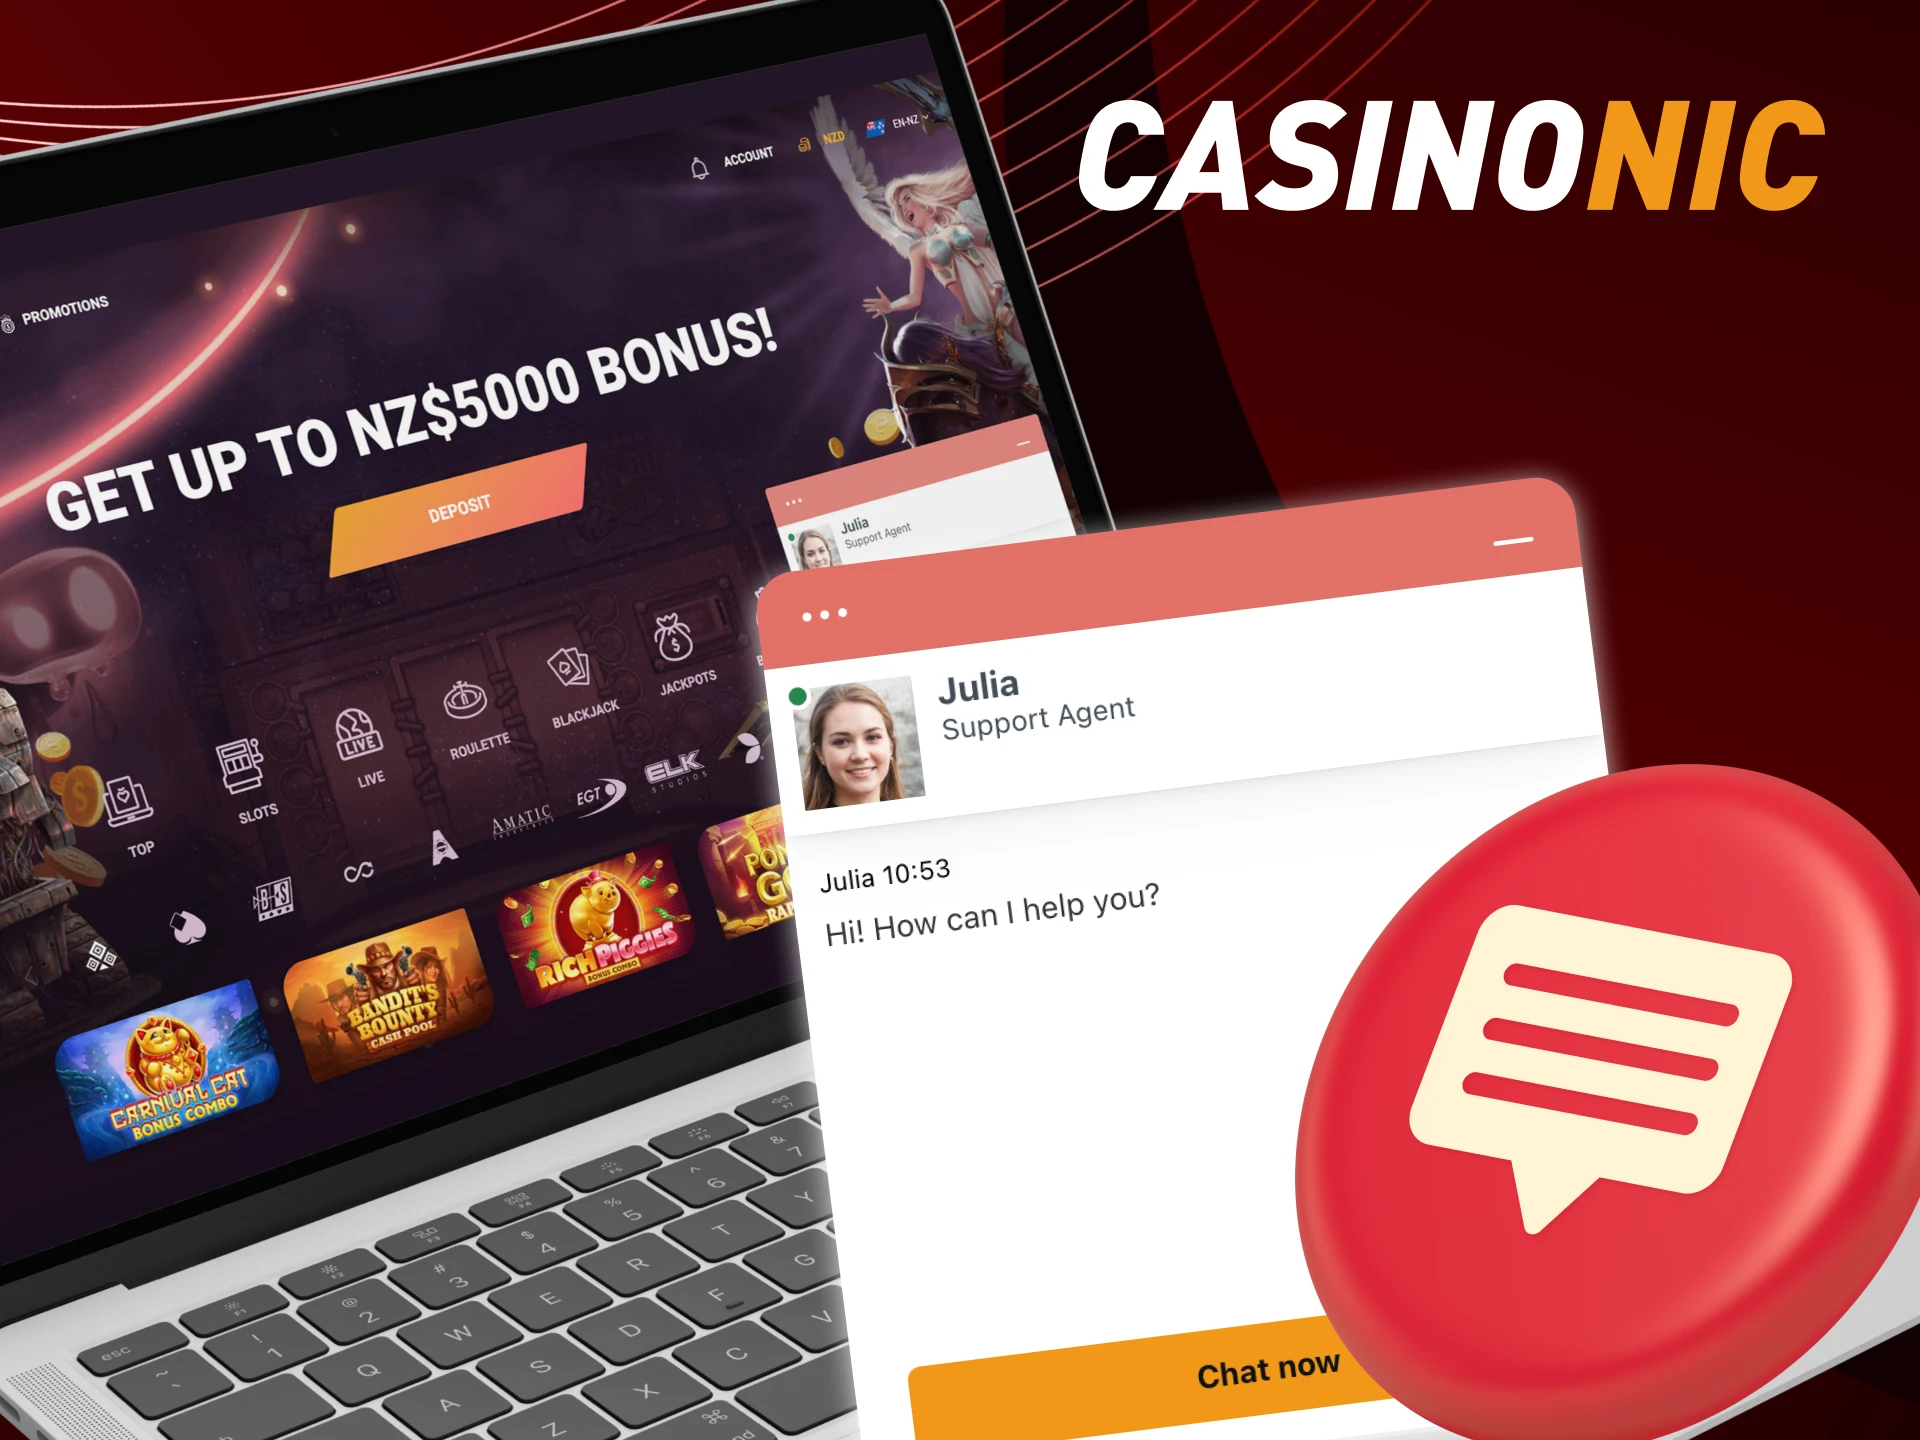 Is there a live chat with customer support on the CasinoNic online casino website.